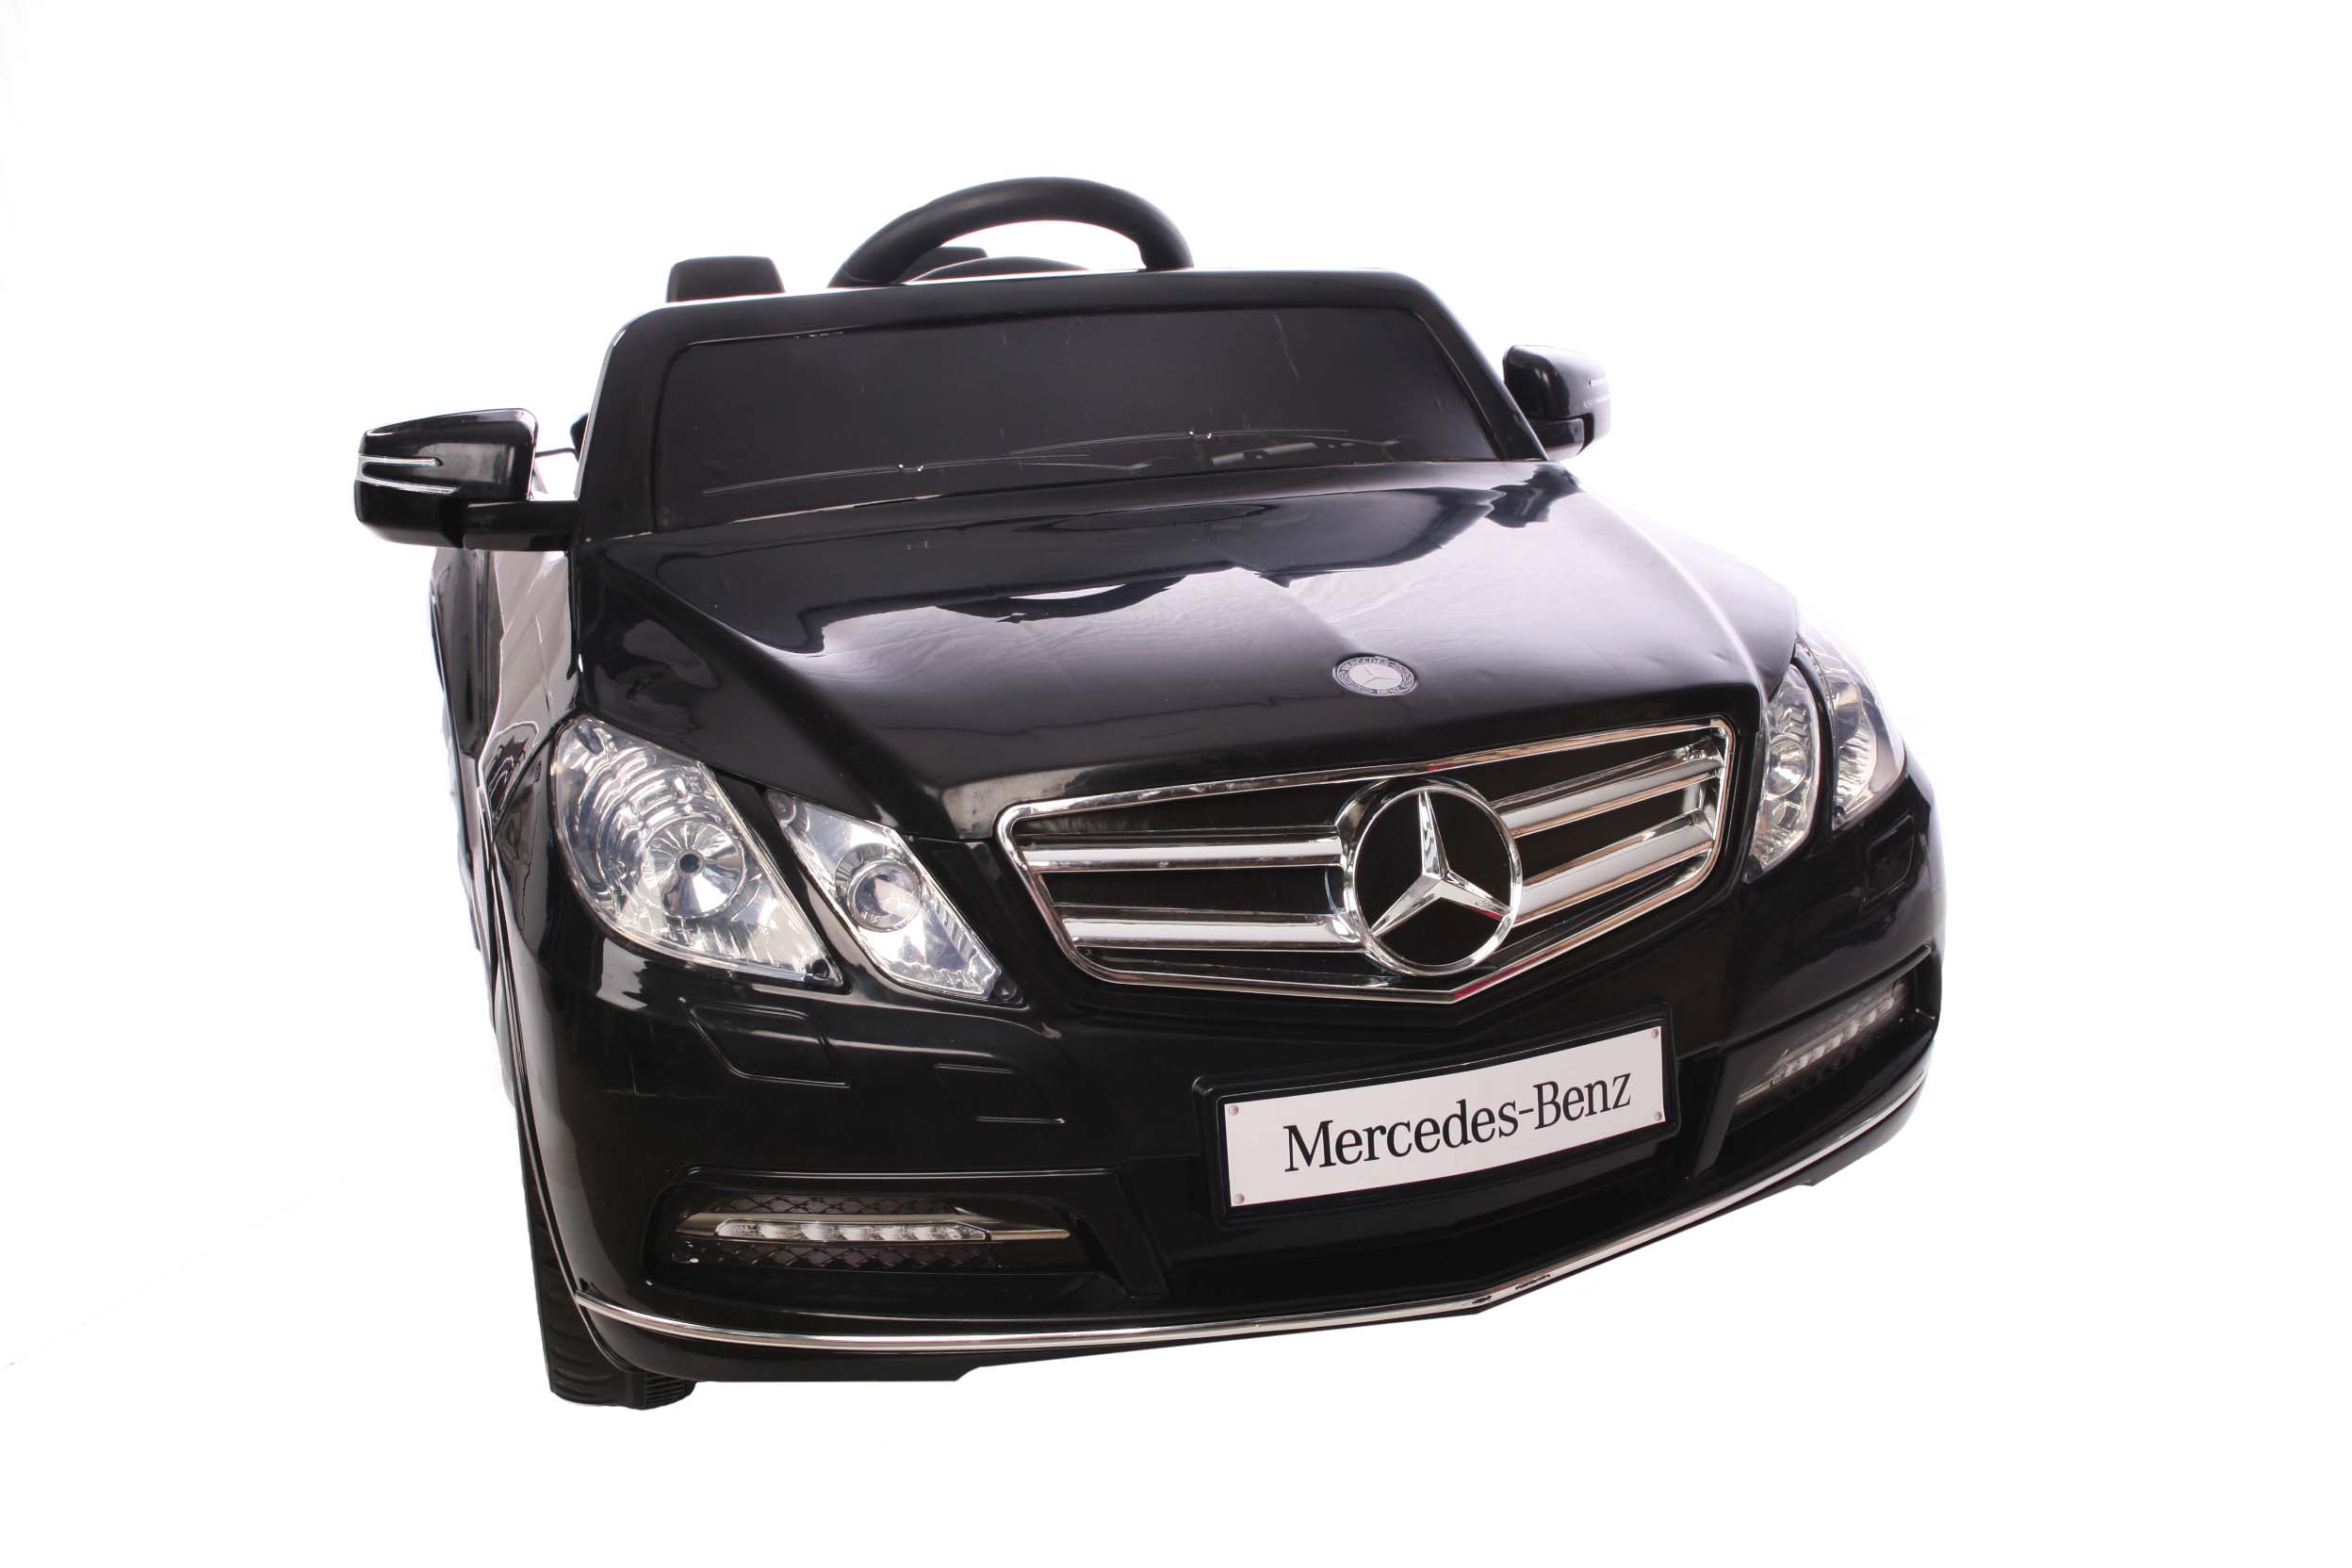 One-Seater Mercedes Benz E550 6-Volt Battery-Operated Ride-On - image 2 of 6